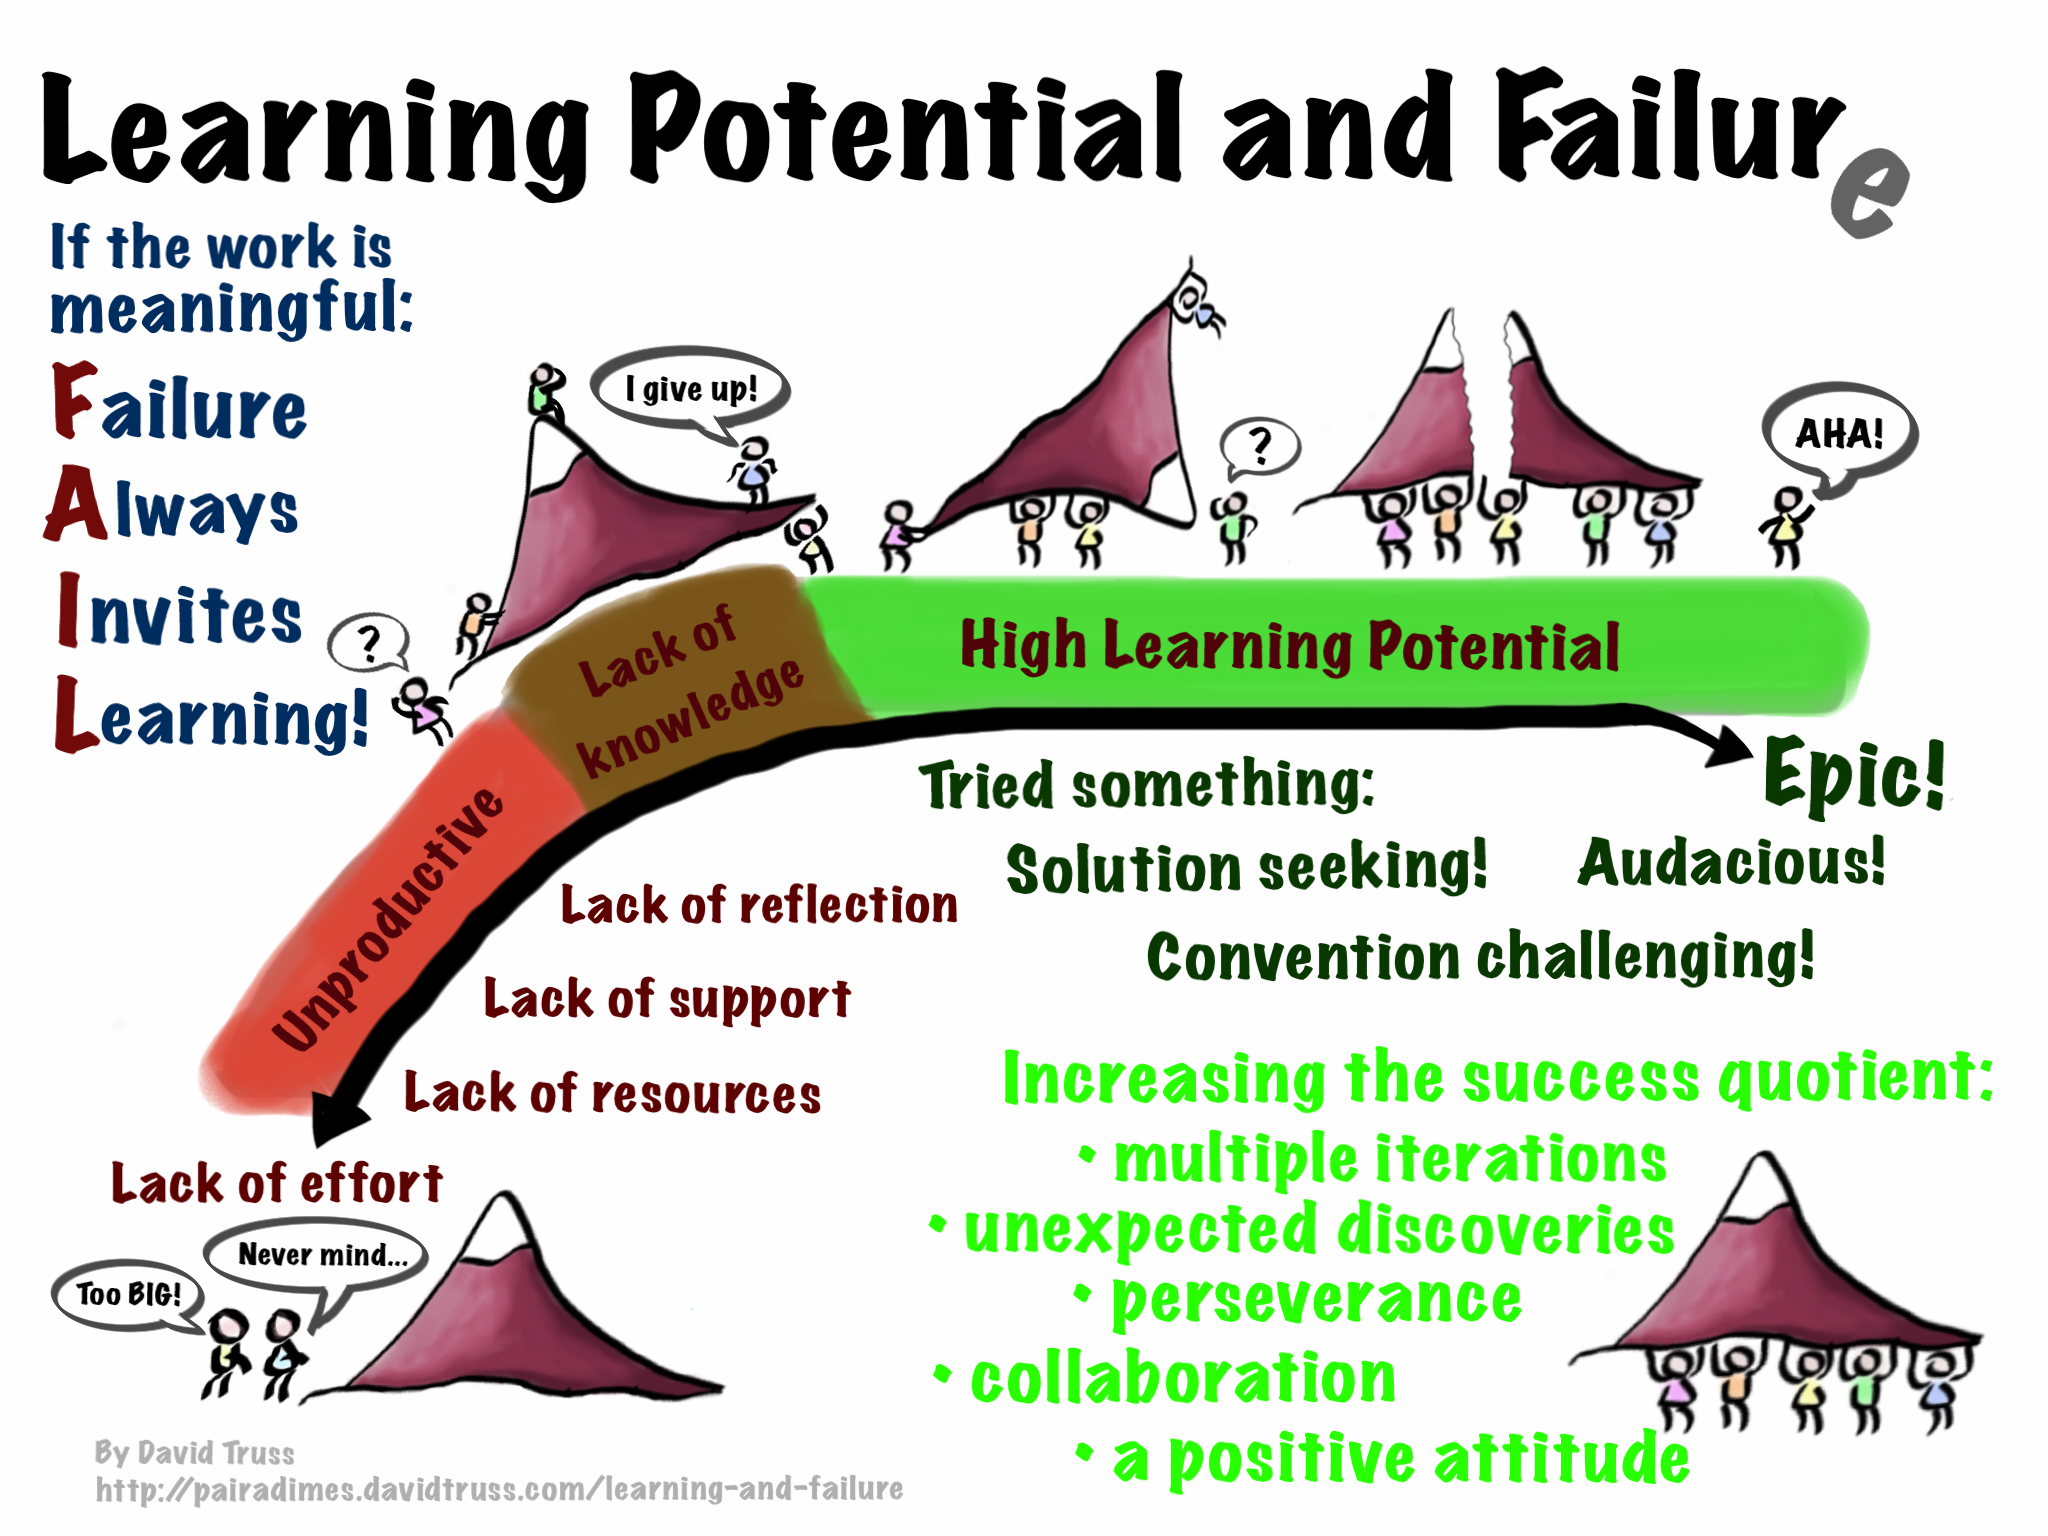 Learning and Failure by David Truss